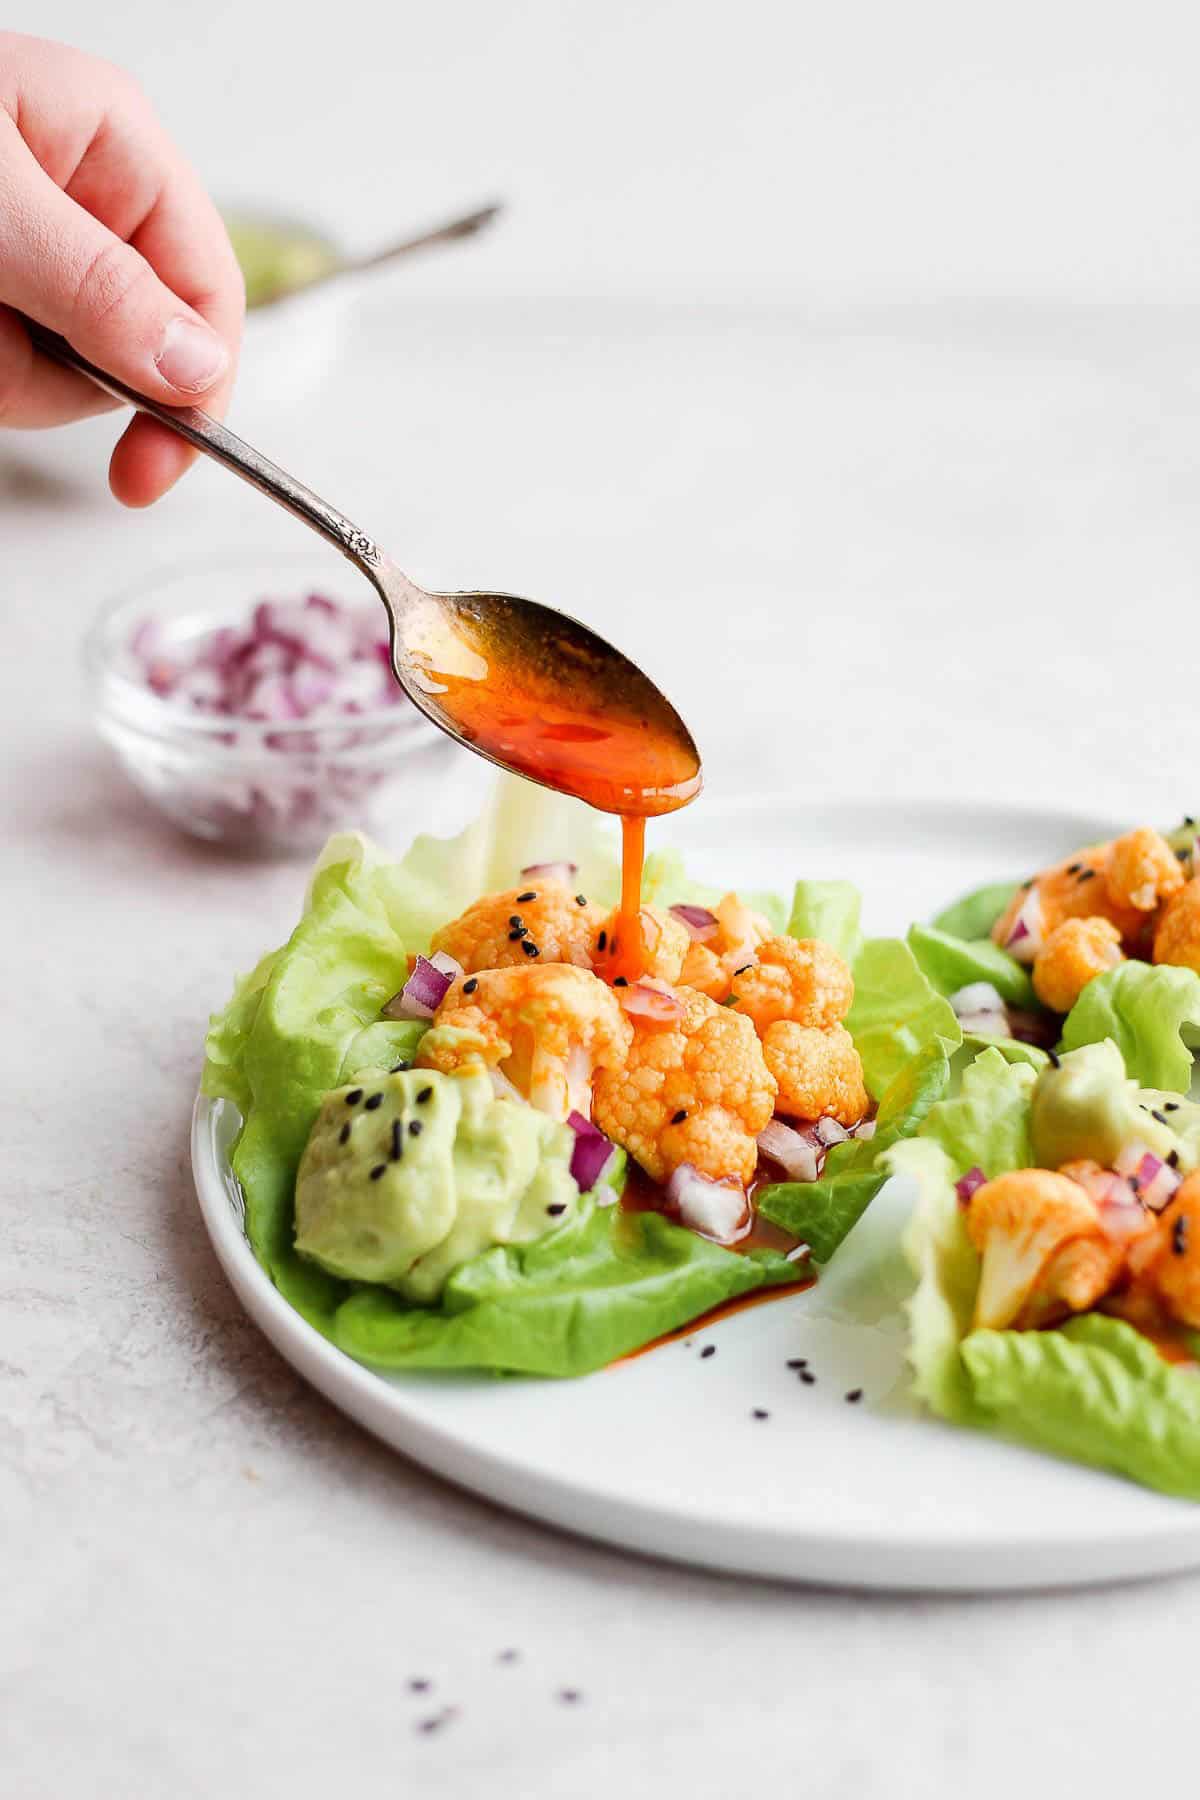 Buffalo cauliflower in a lettuce wrap and a spoon is pouring more buffalo sauce on top.